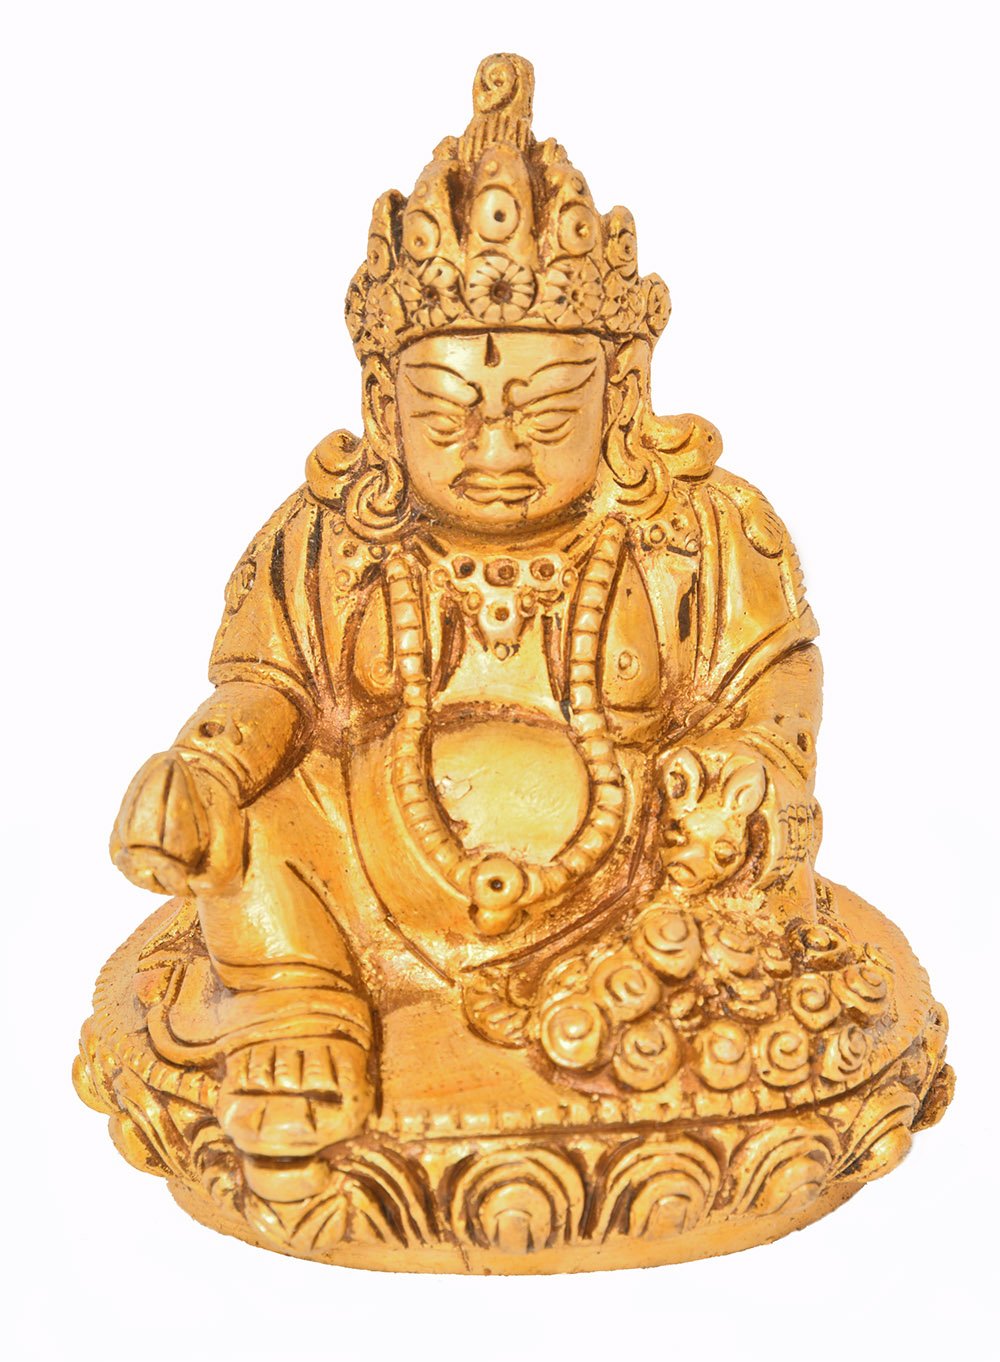 Kubera - The God of Wealth (Small Statue) | Exotic India Art